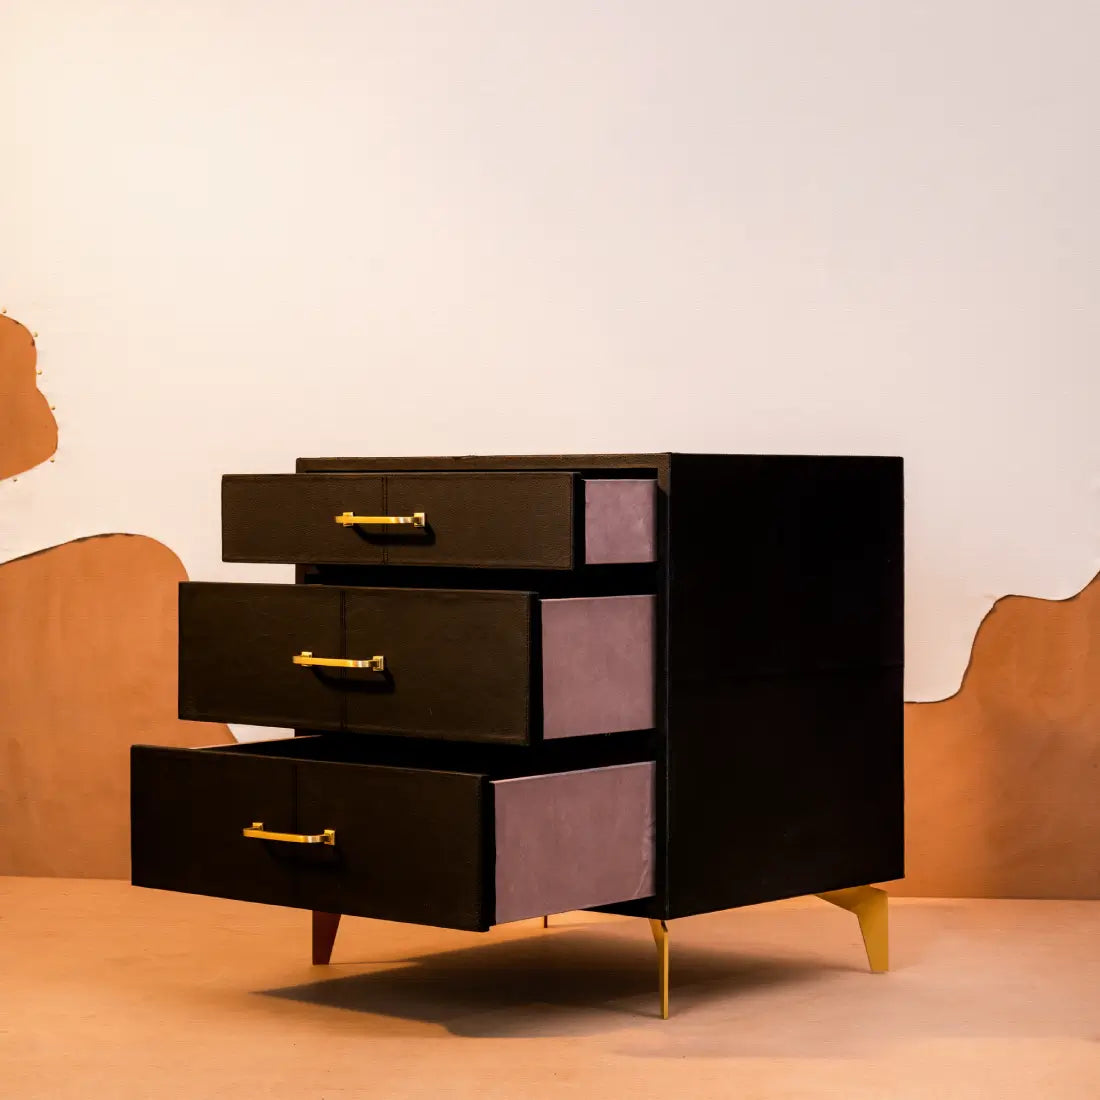 Nightstand with Three Drawers Black